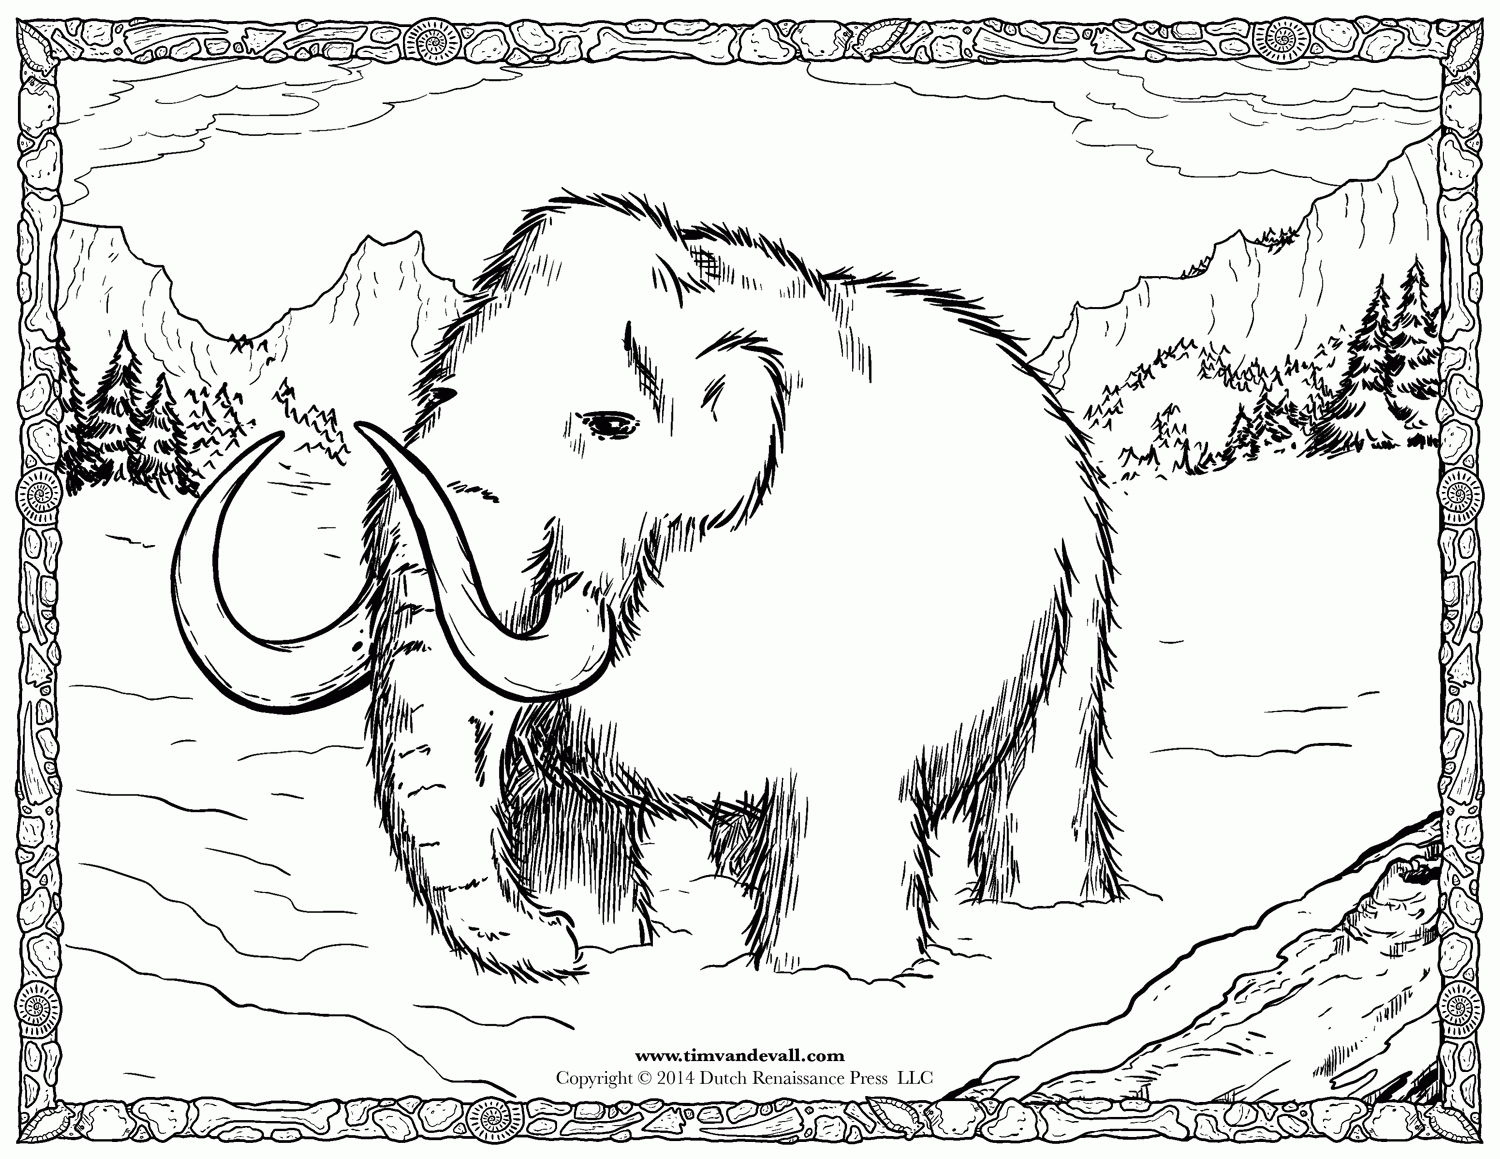 wooly mammoth coloring page - High Quality Coloring Pages